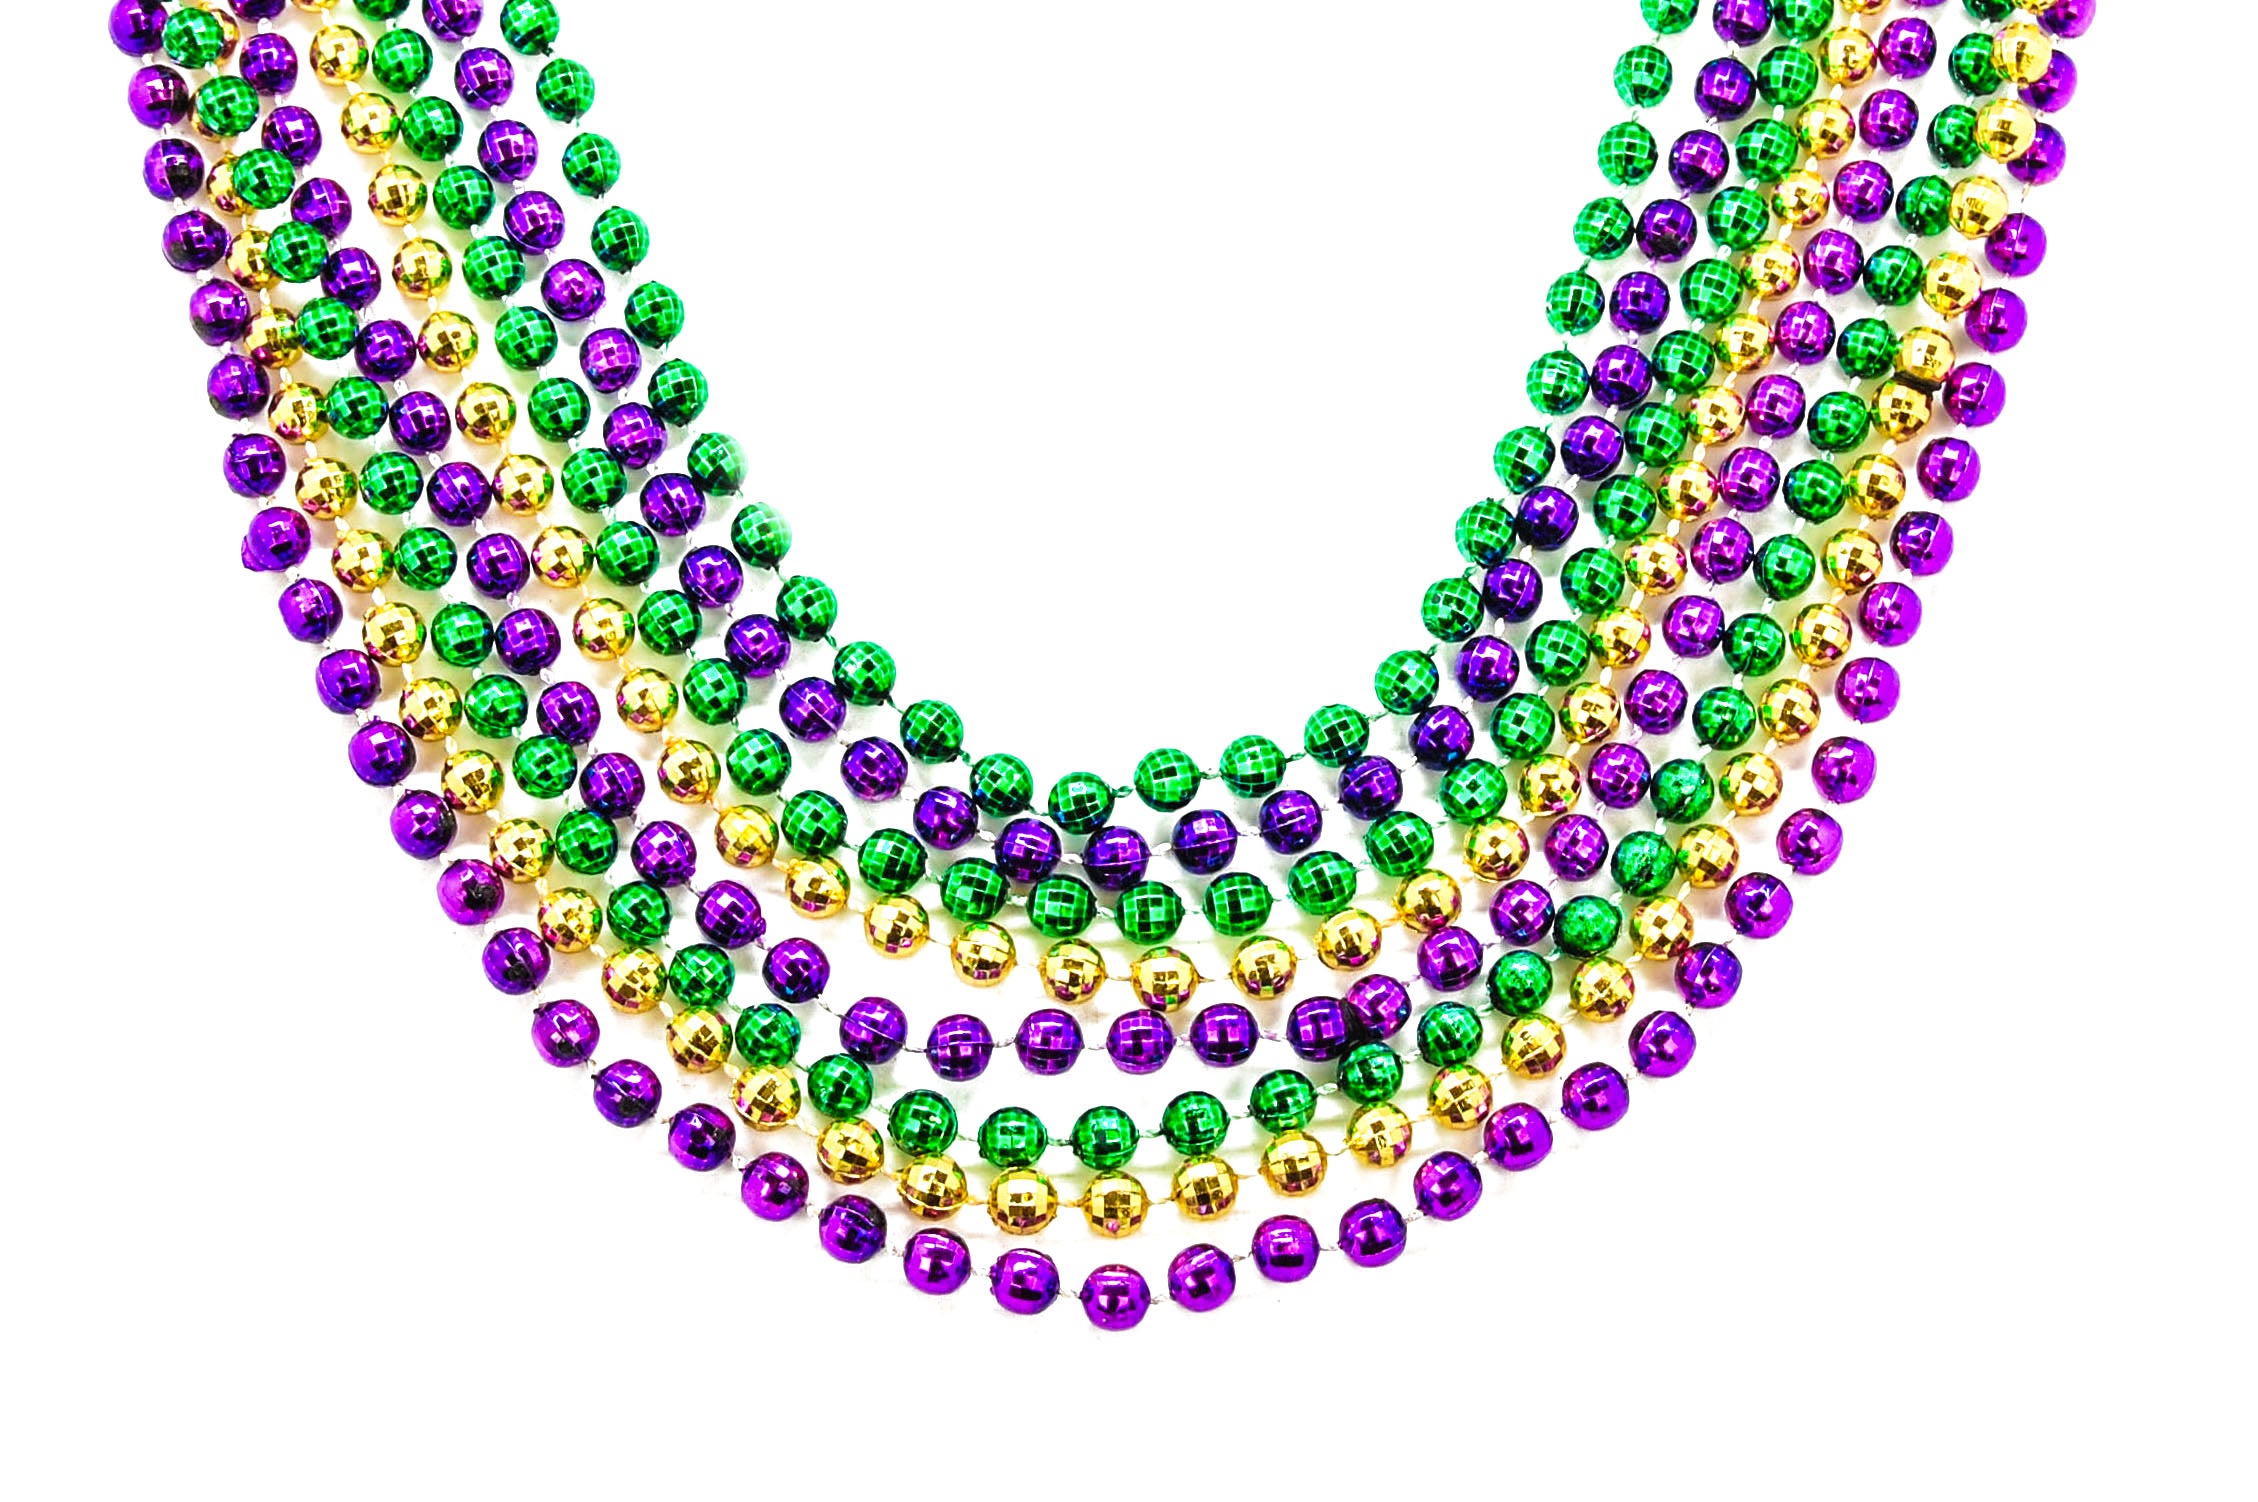 Temicle 12 Pcs 33 Mardi Gras Beads Necklace - 7mm Gold Green Purple  Plastic Bead Necklaces Bundle for Mardi Gras Throws, Party Costume, St  Patrick's